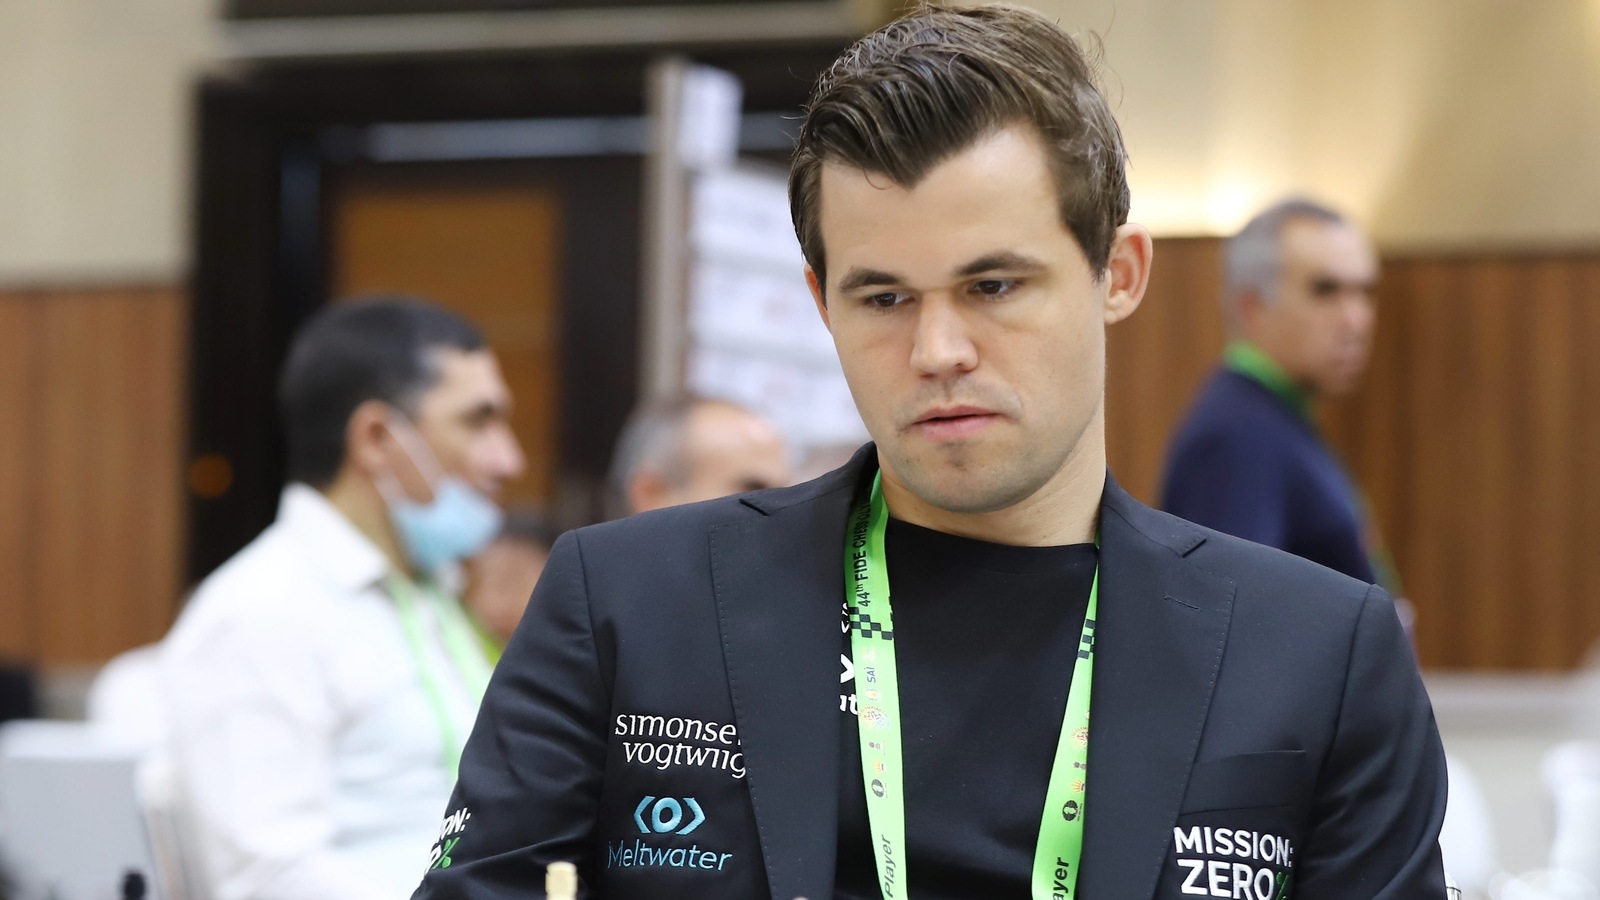 FIDE Forms Investigatory Panel For Carlsen-Niemann Controversy 